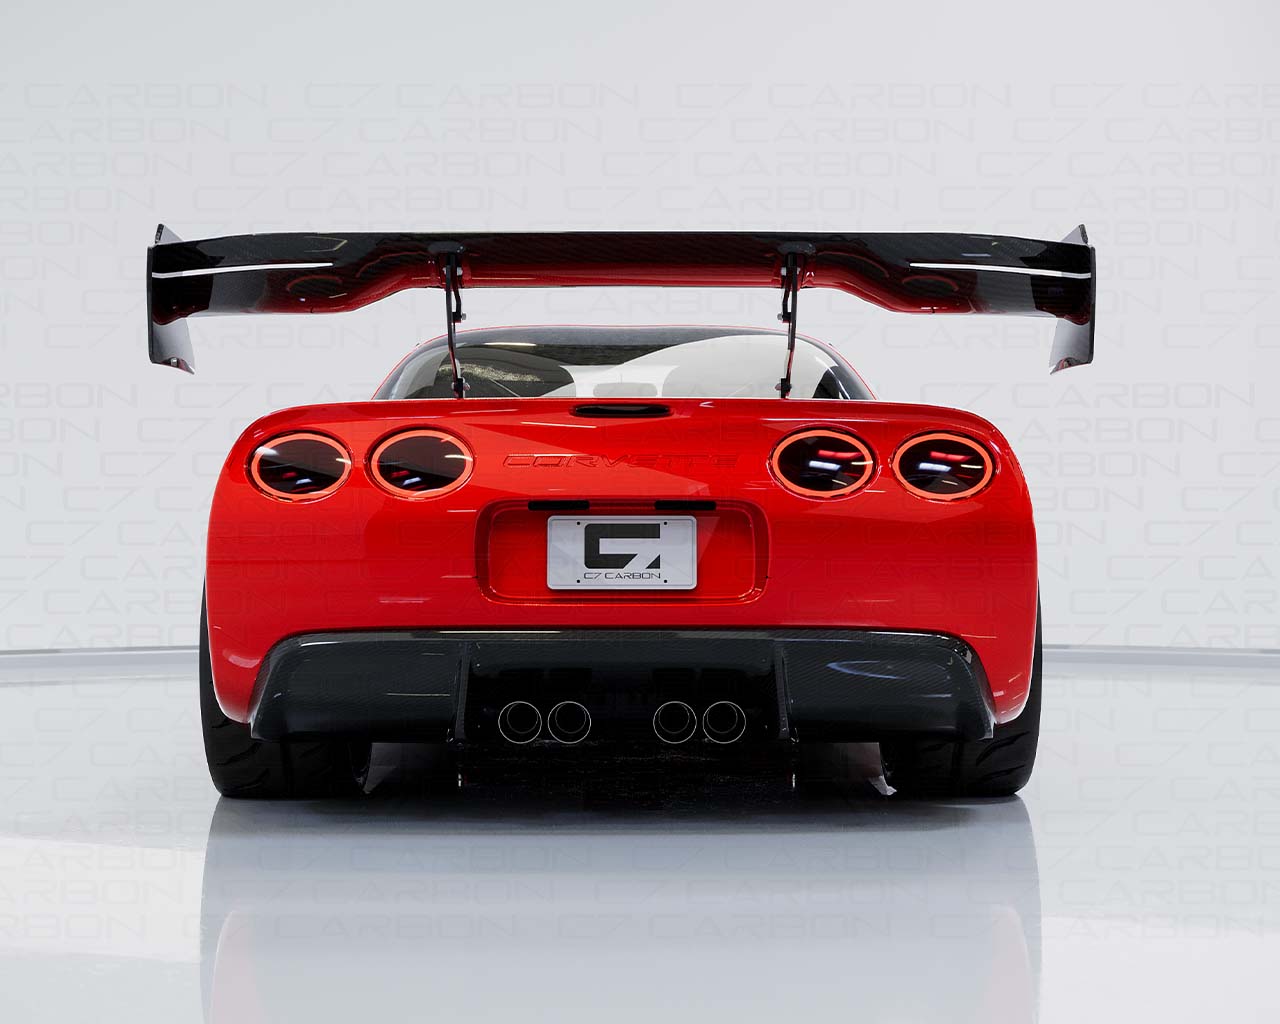 Corvette C5, Victory Chassis Mounted Rear Spoiler